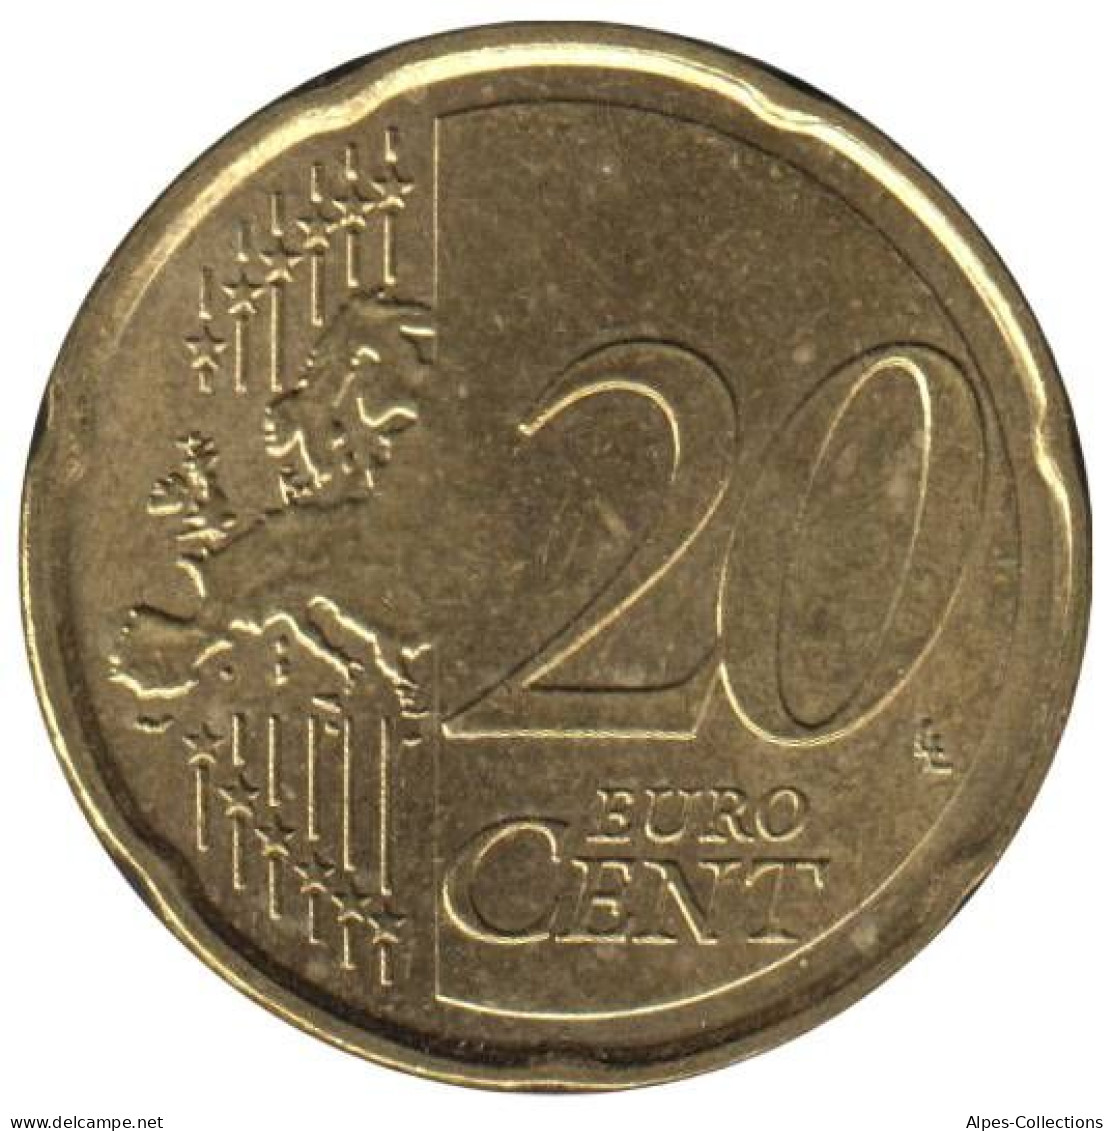 AN02017.1 - ANDORRE - 20 Cents D'euro - 2017 - Andorre